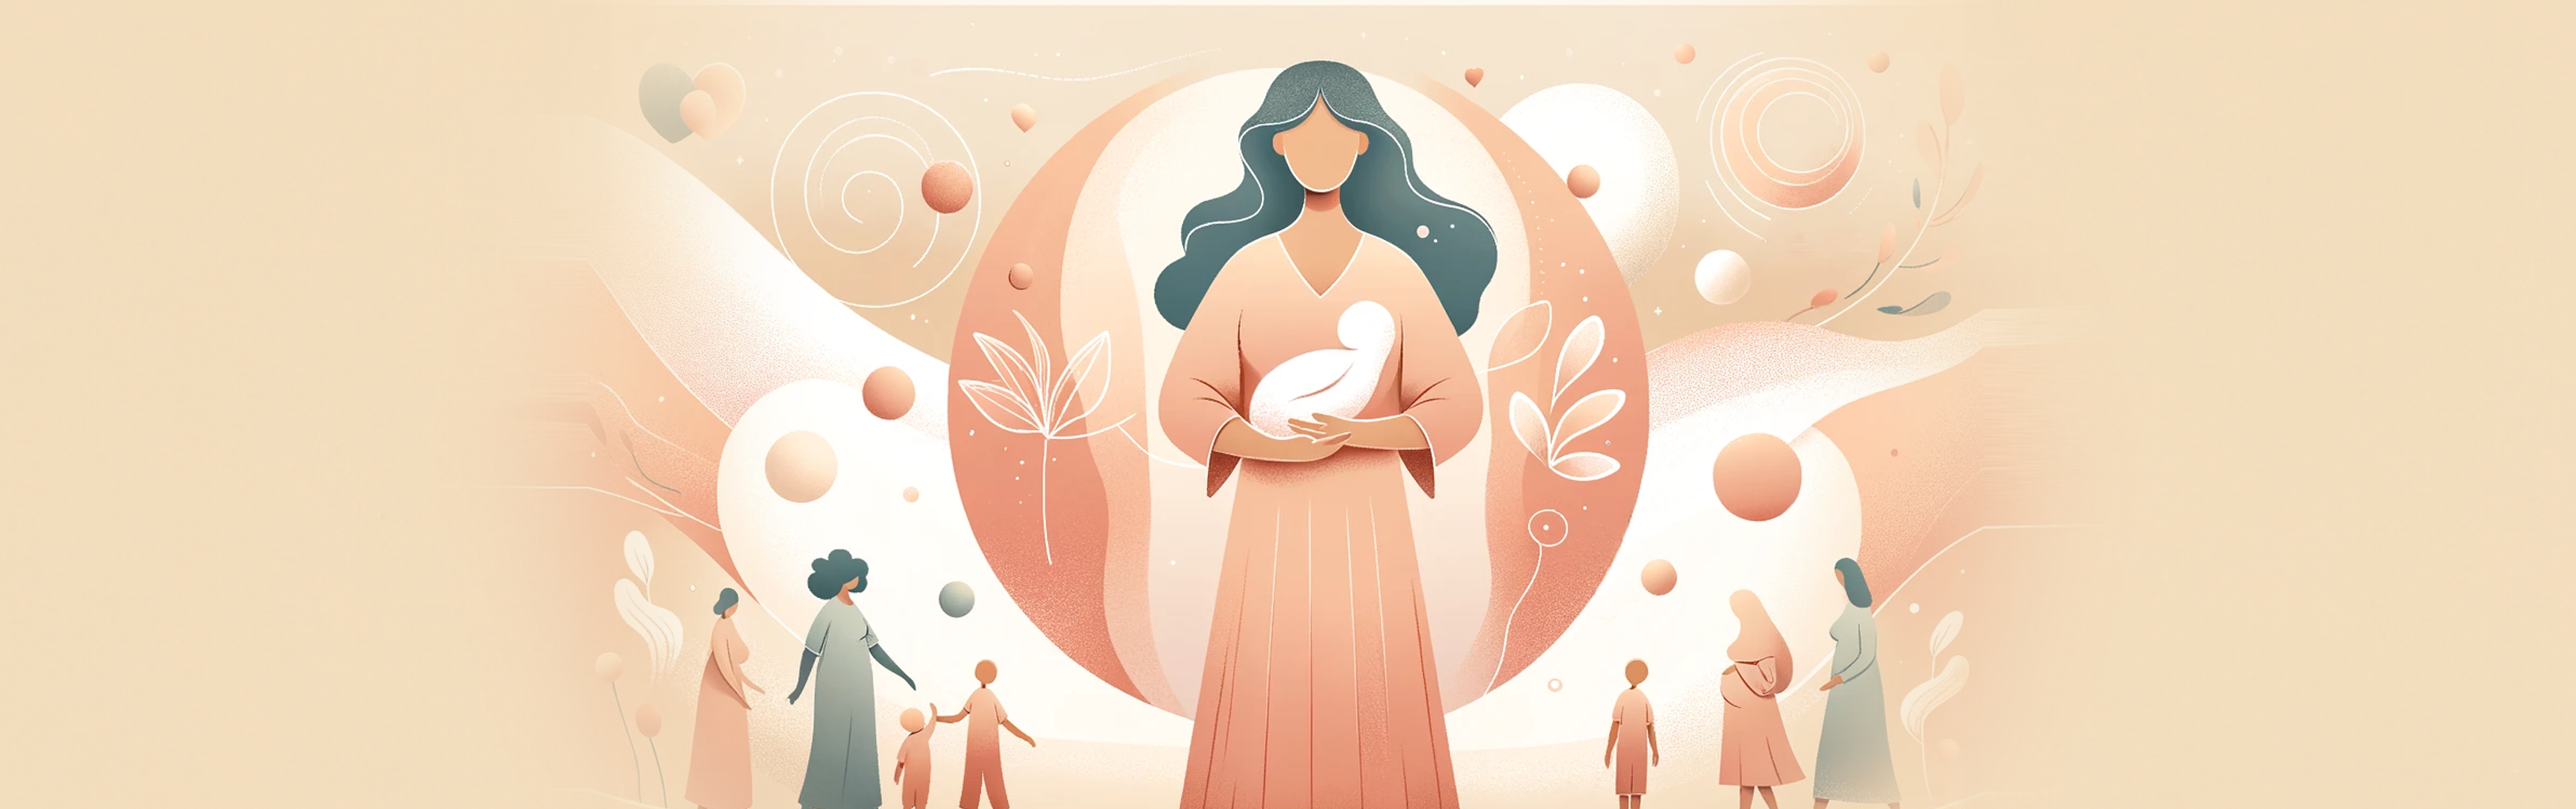 Graphic of celebrating World Doula Day. An illustration of a Doula holding a baby with pregnant women around her.